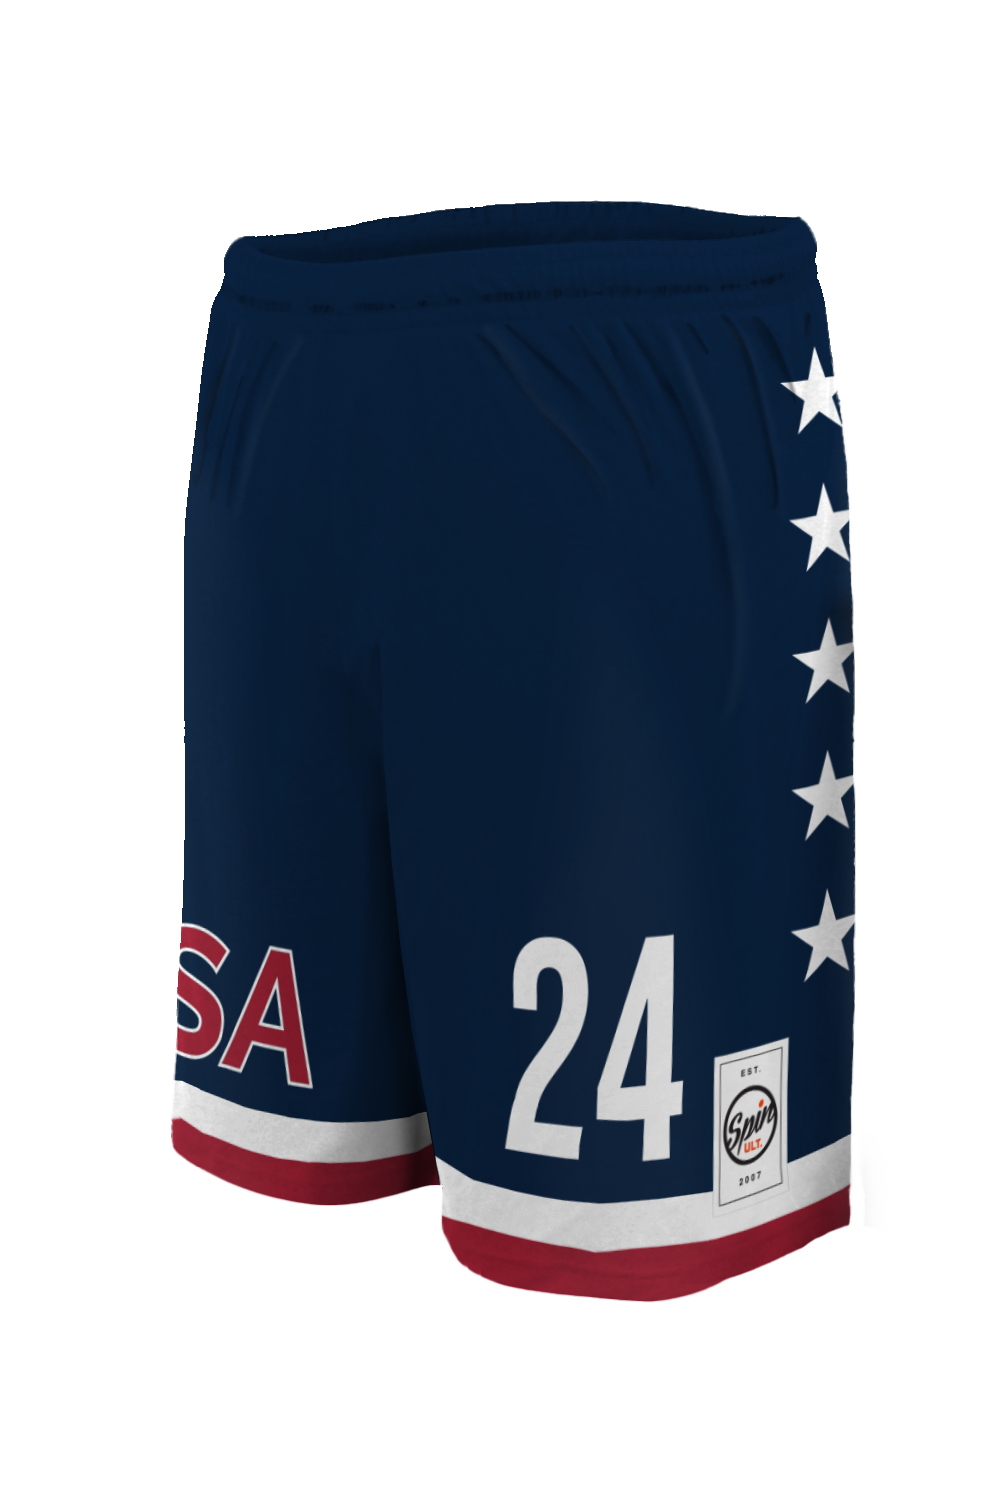 USNT Micro Shorts (Player) – Spin Ultimate